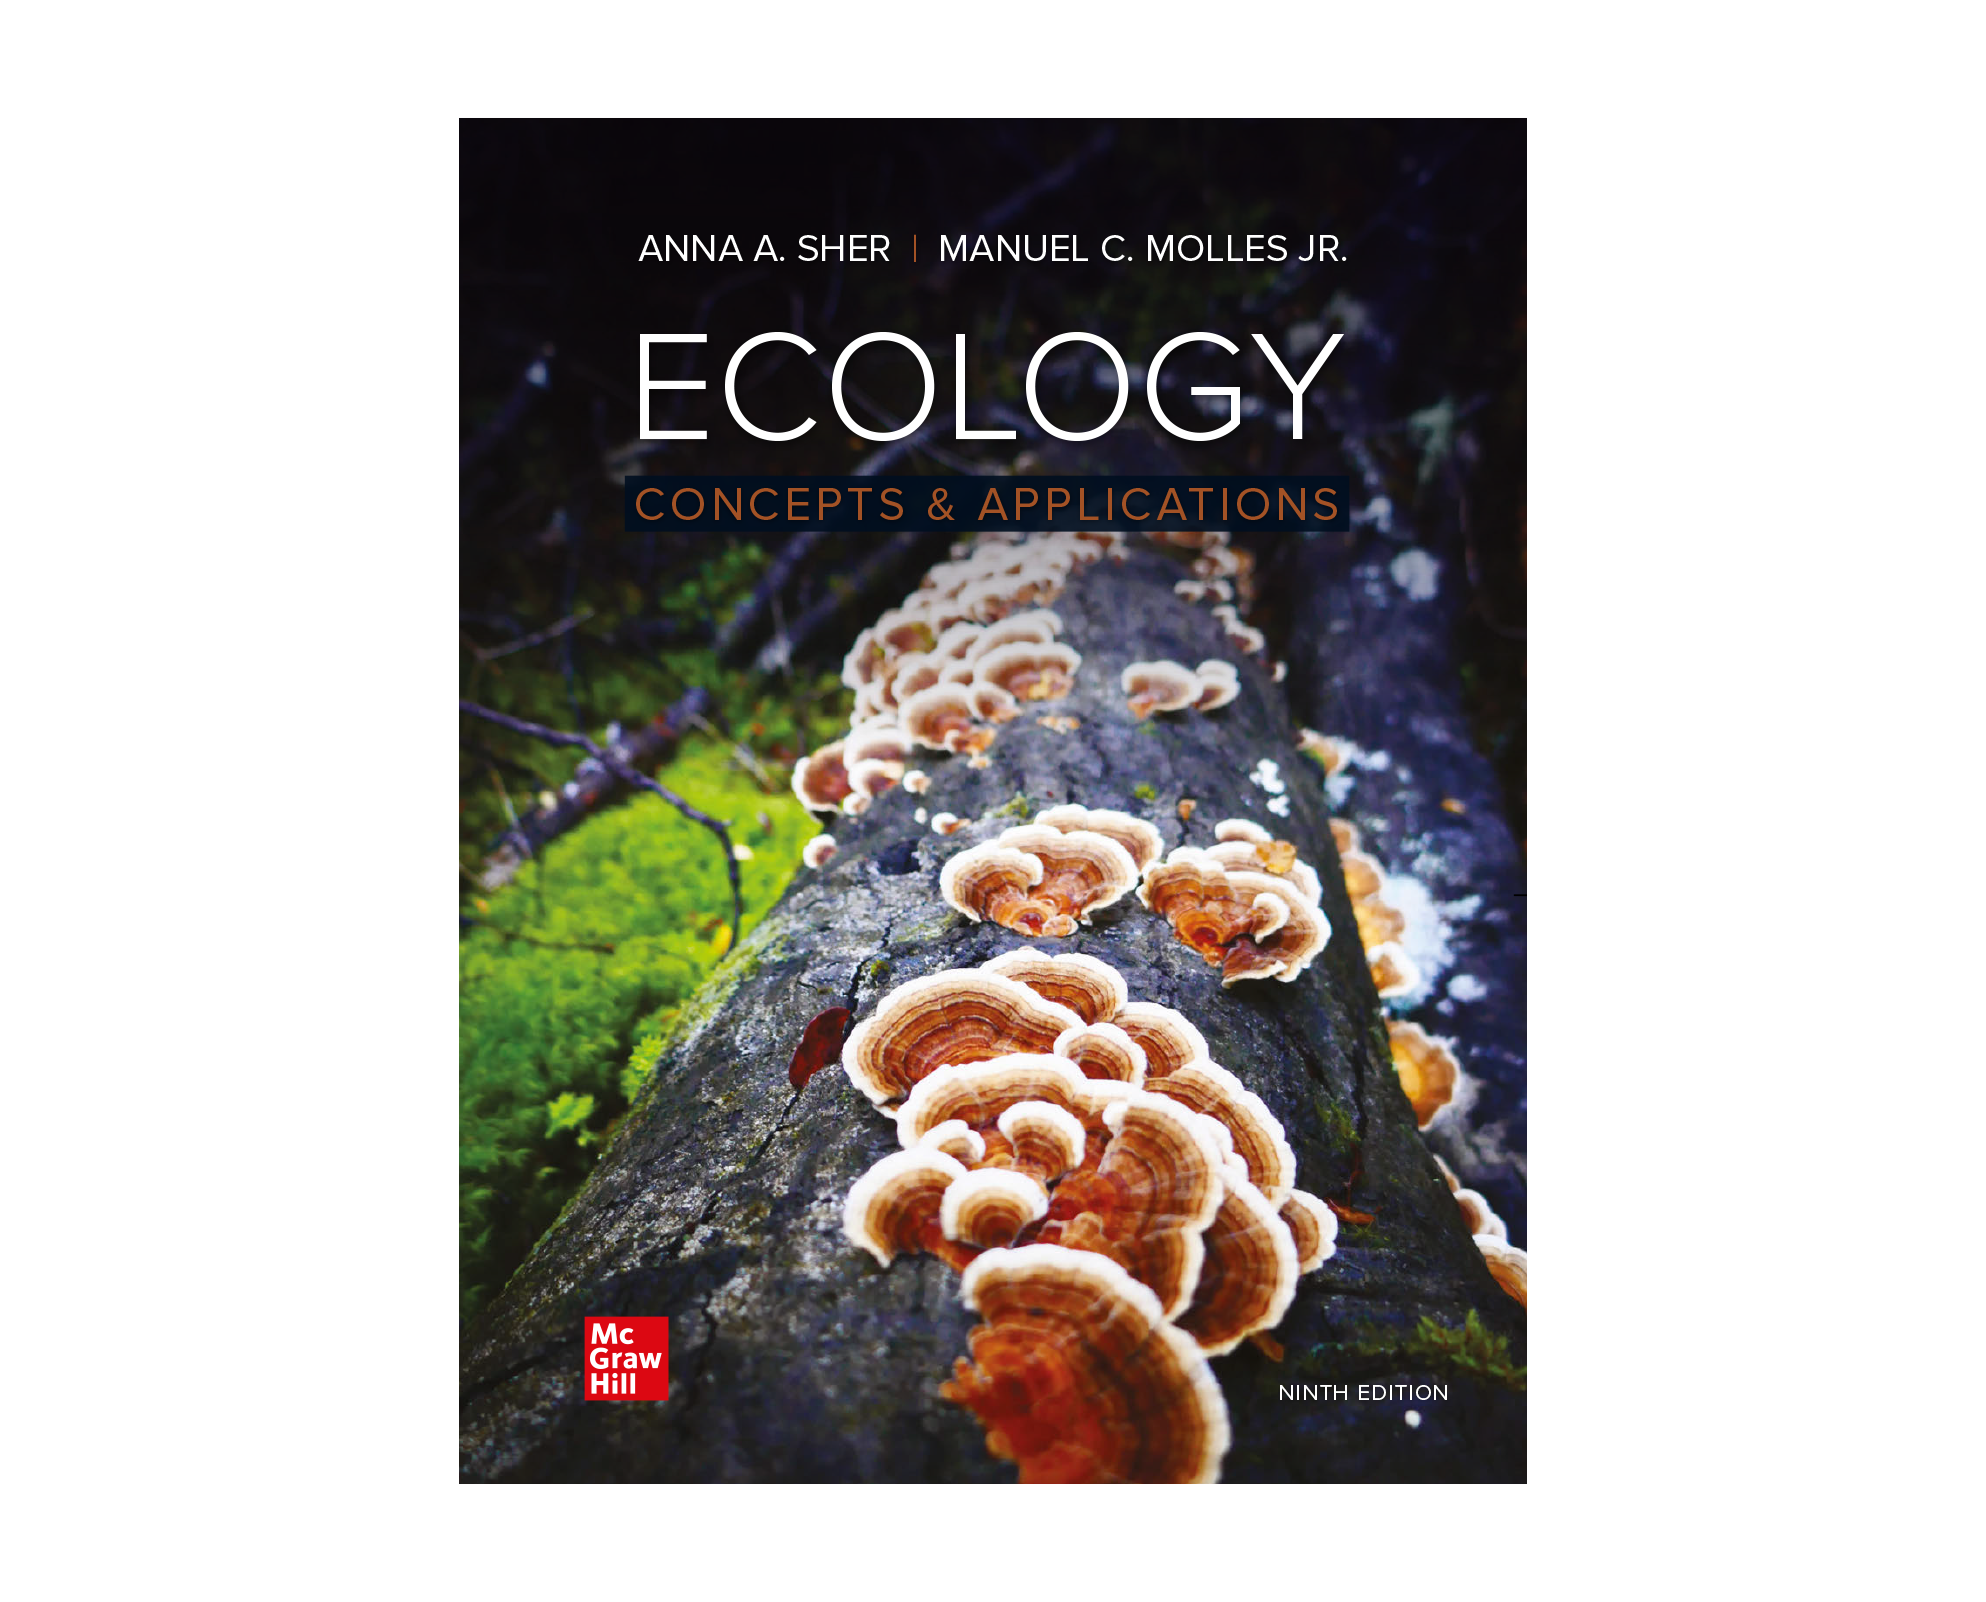 Ecology textbook cover